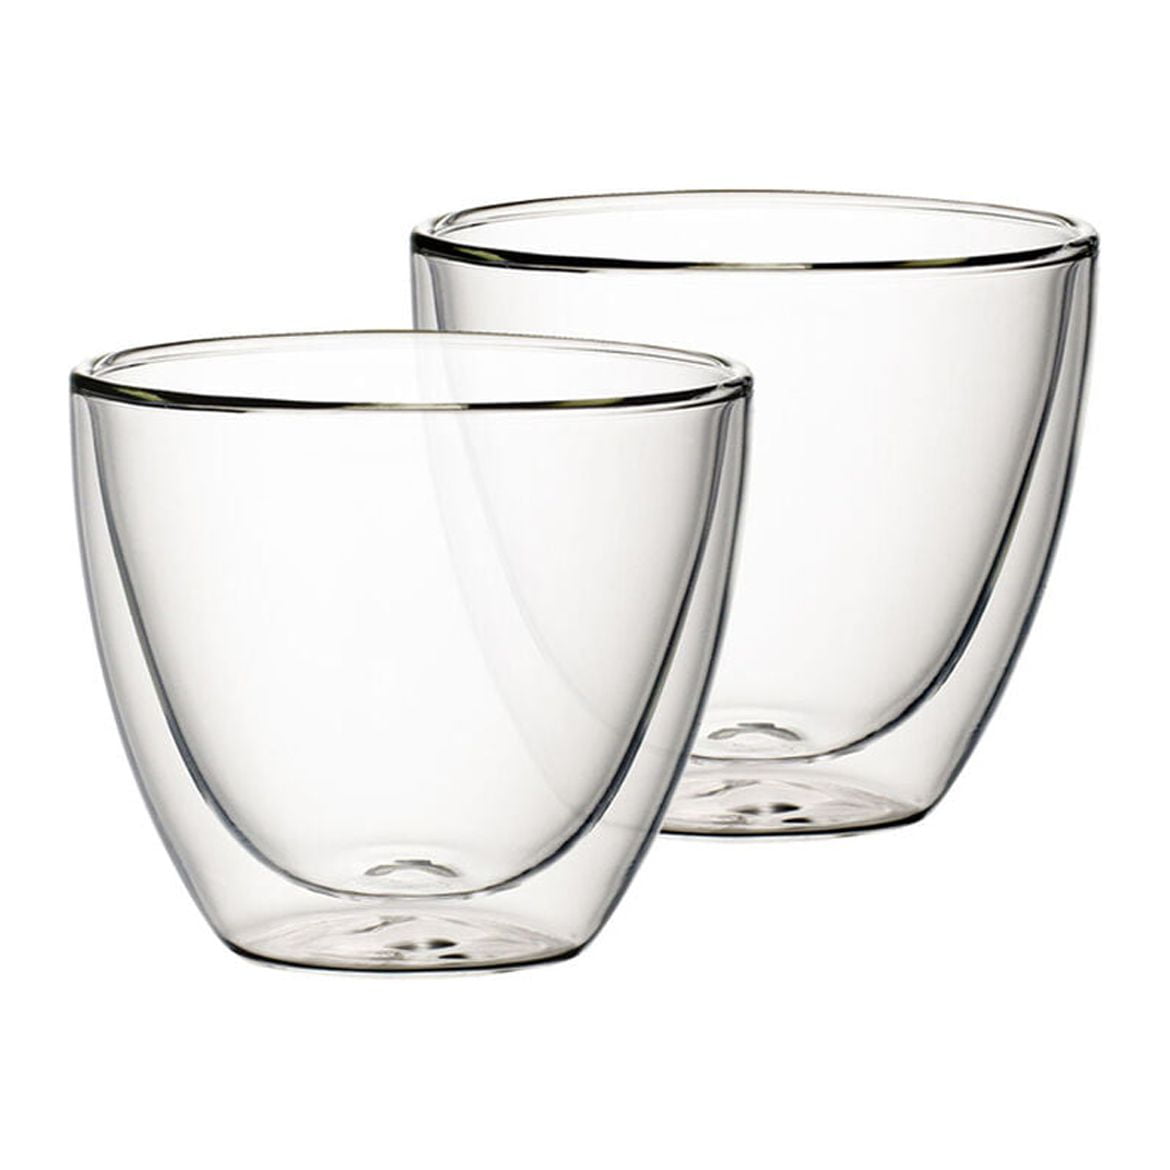 Villeroy & Boch Artesano L Hot and Cold Beverages Cup Set Of Two